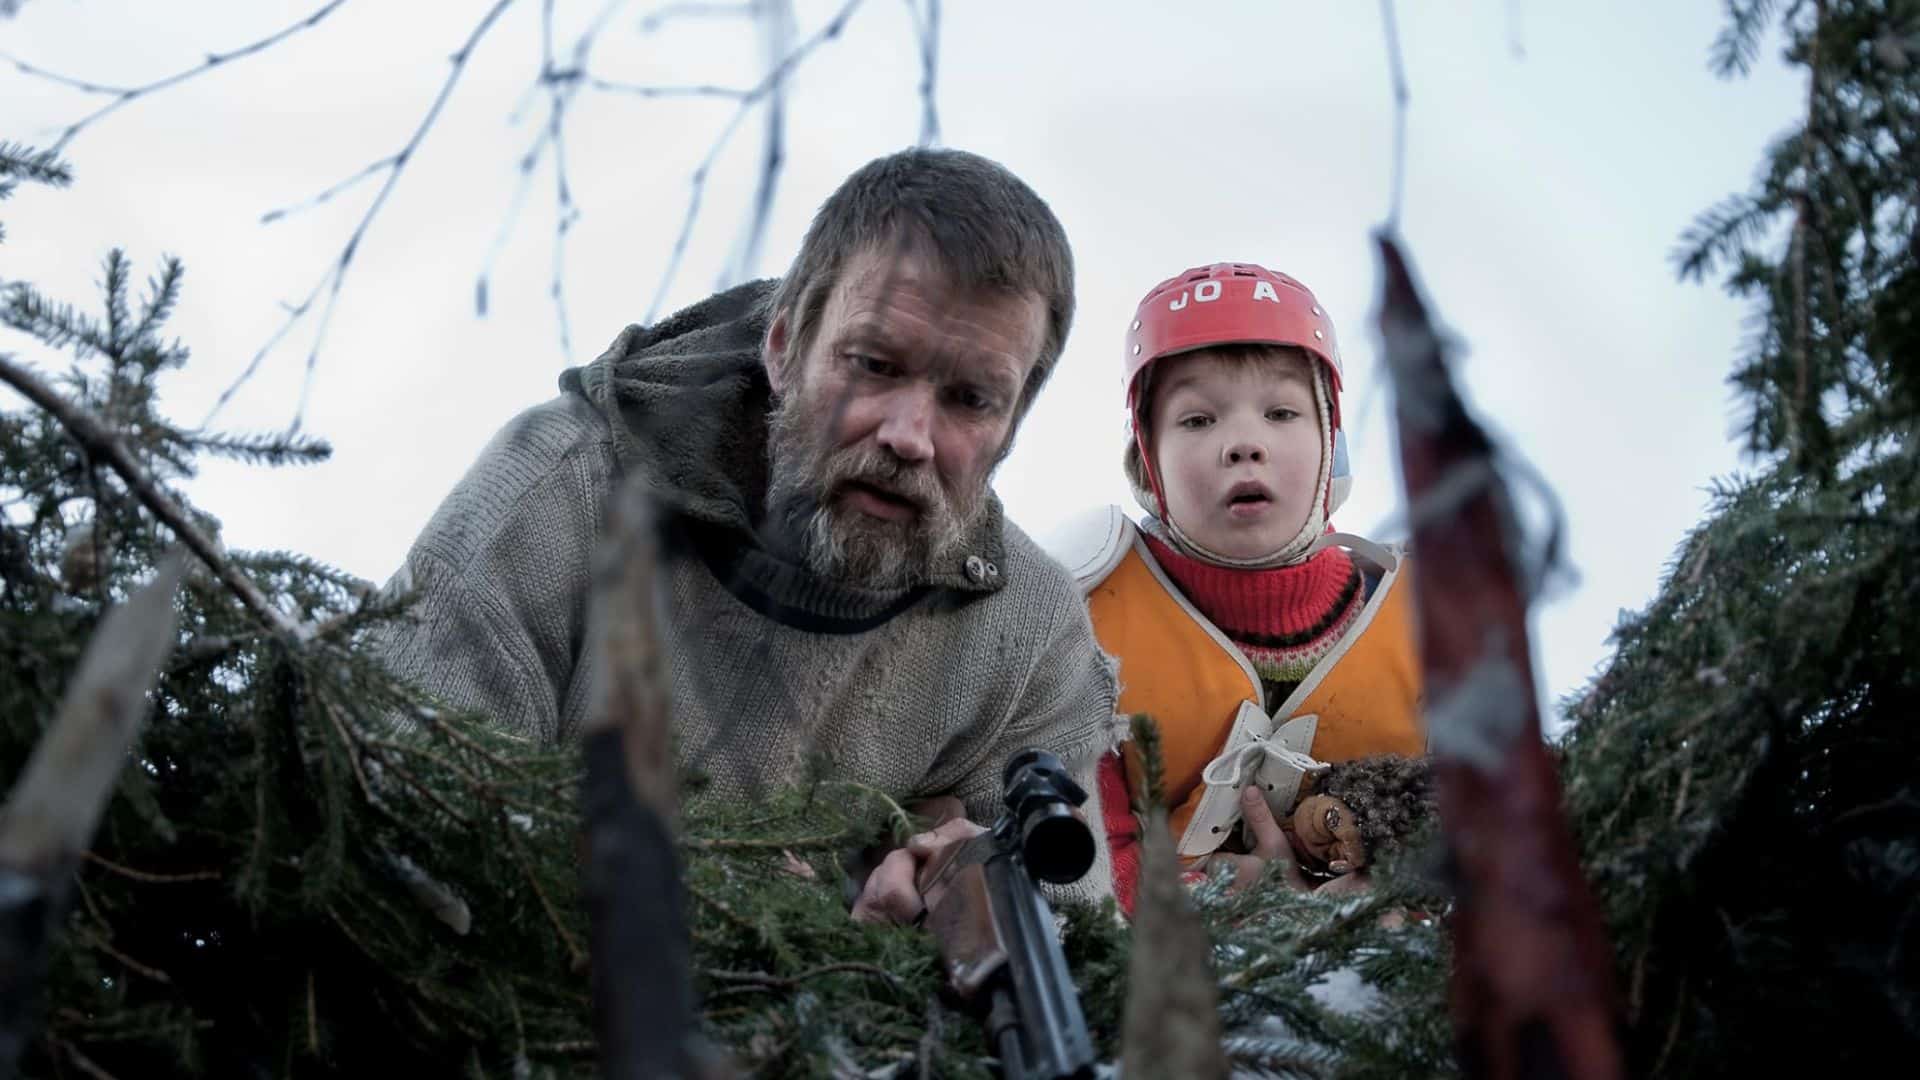 A man and a boy look into a trap with spikes in this image from Cinet.